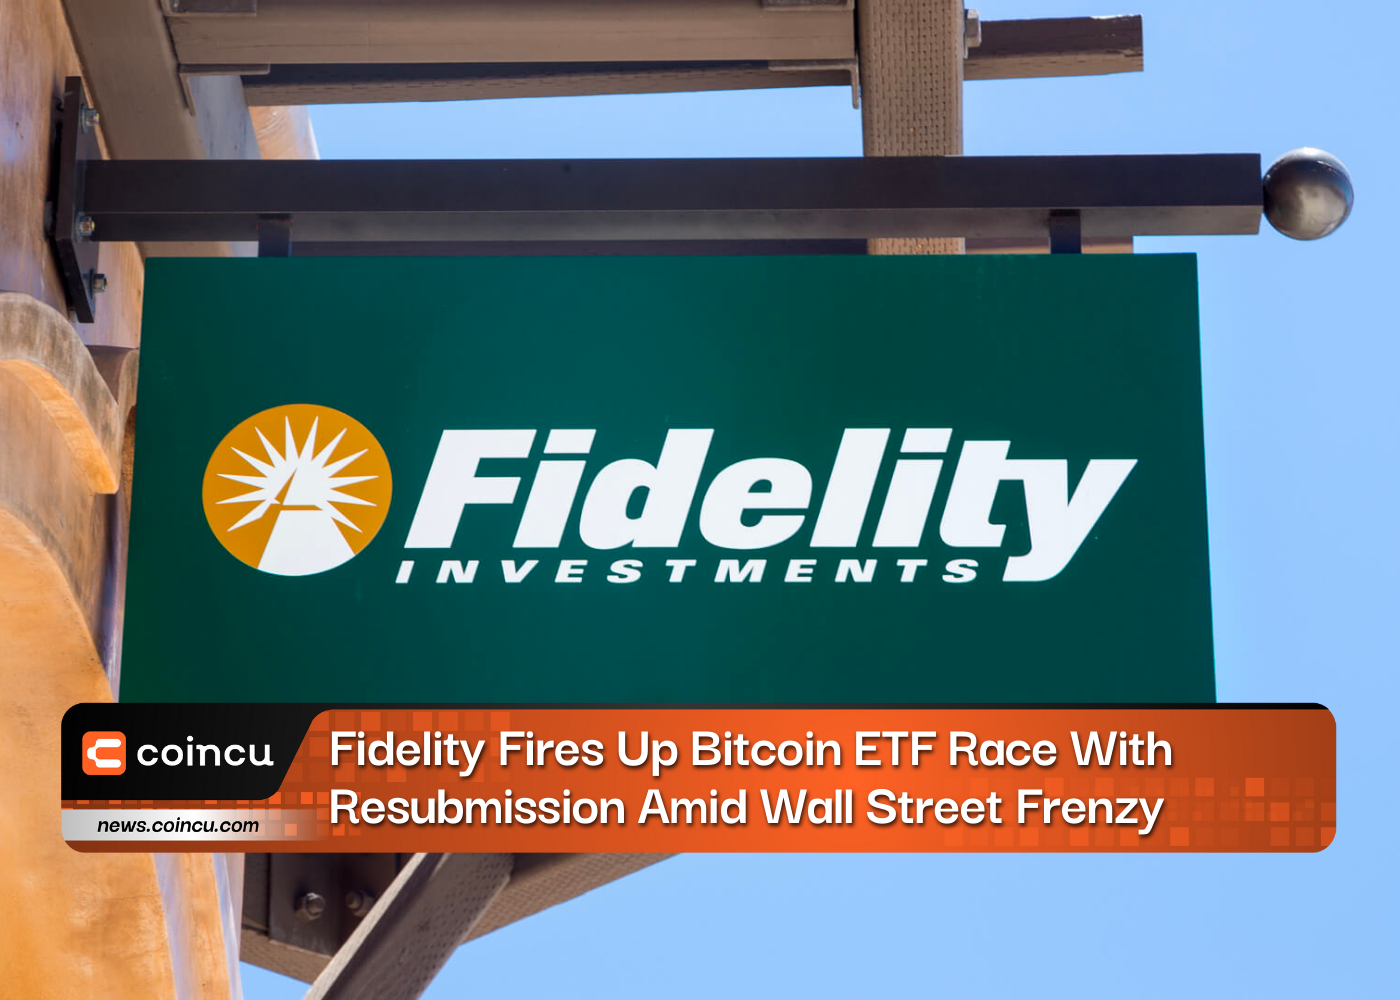 Fidelity Fires Up Bitcoin ETF Race With Resubmission Amid Wall Street Frenzy